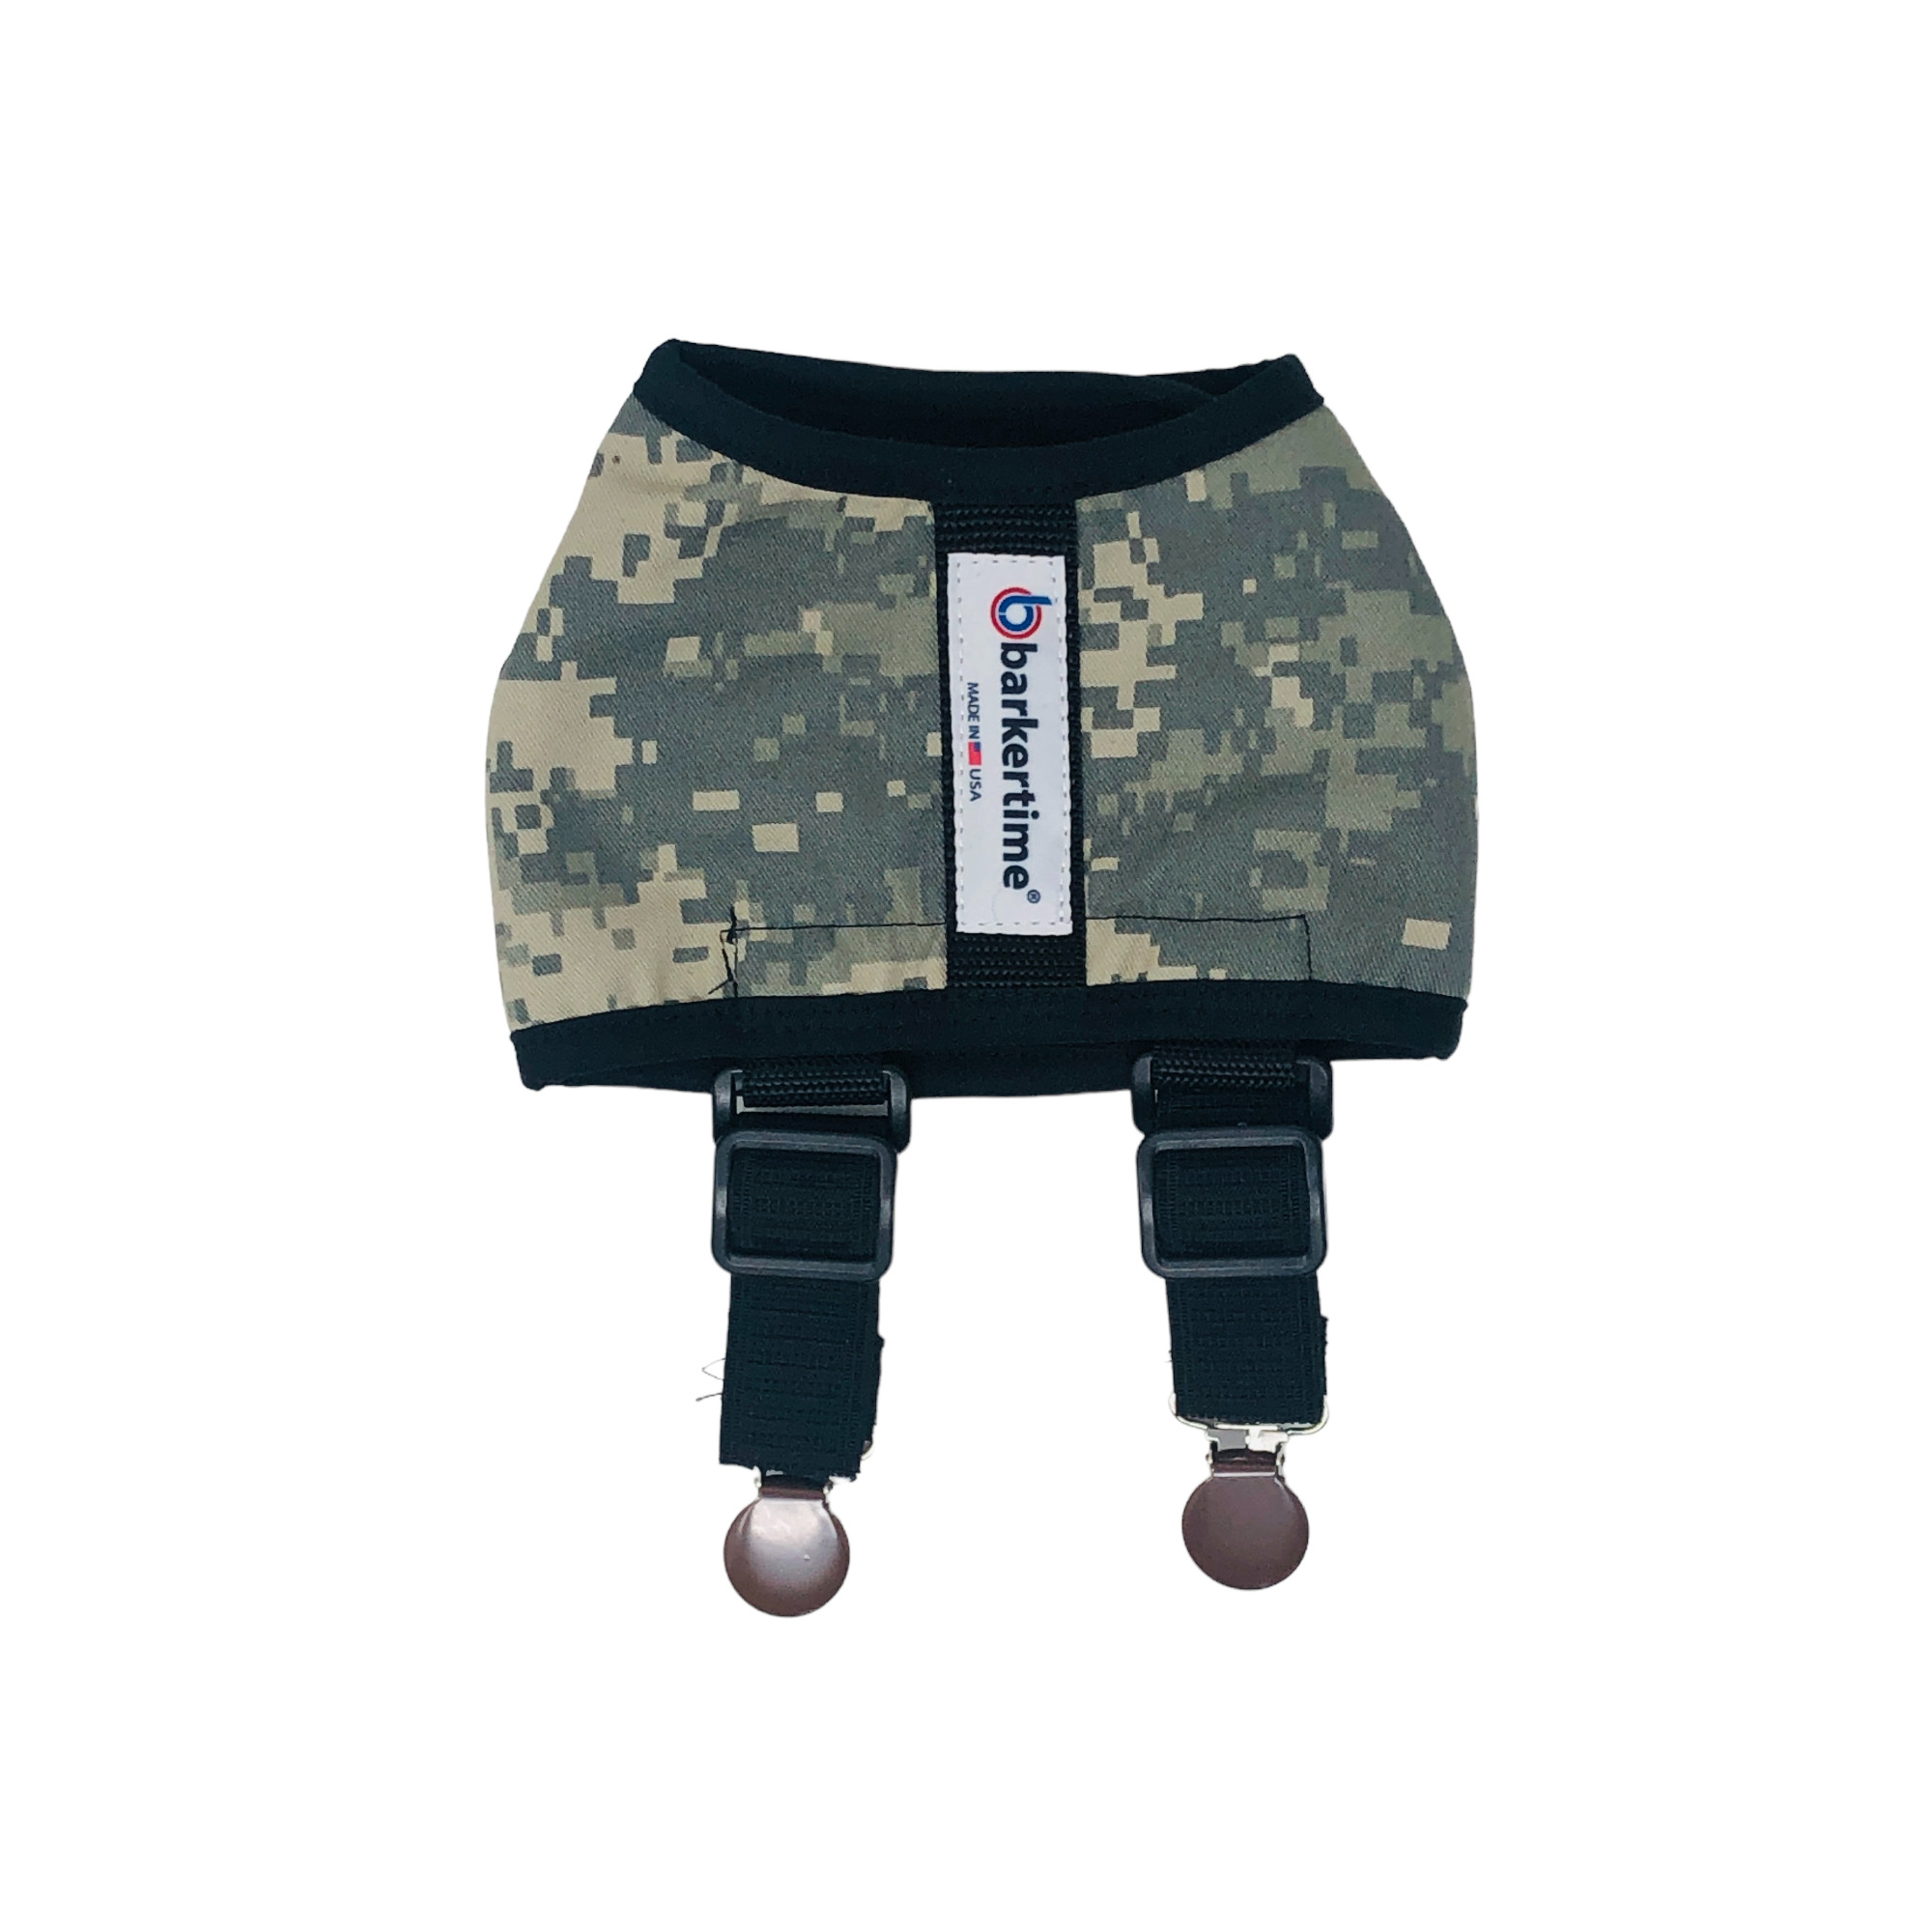 Digital Camo Diaper Suspender Harness to Keep Dog Diapers On